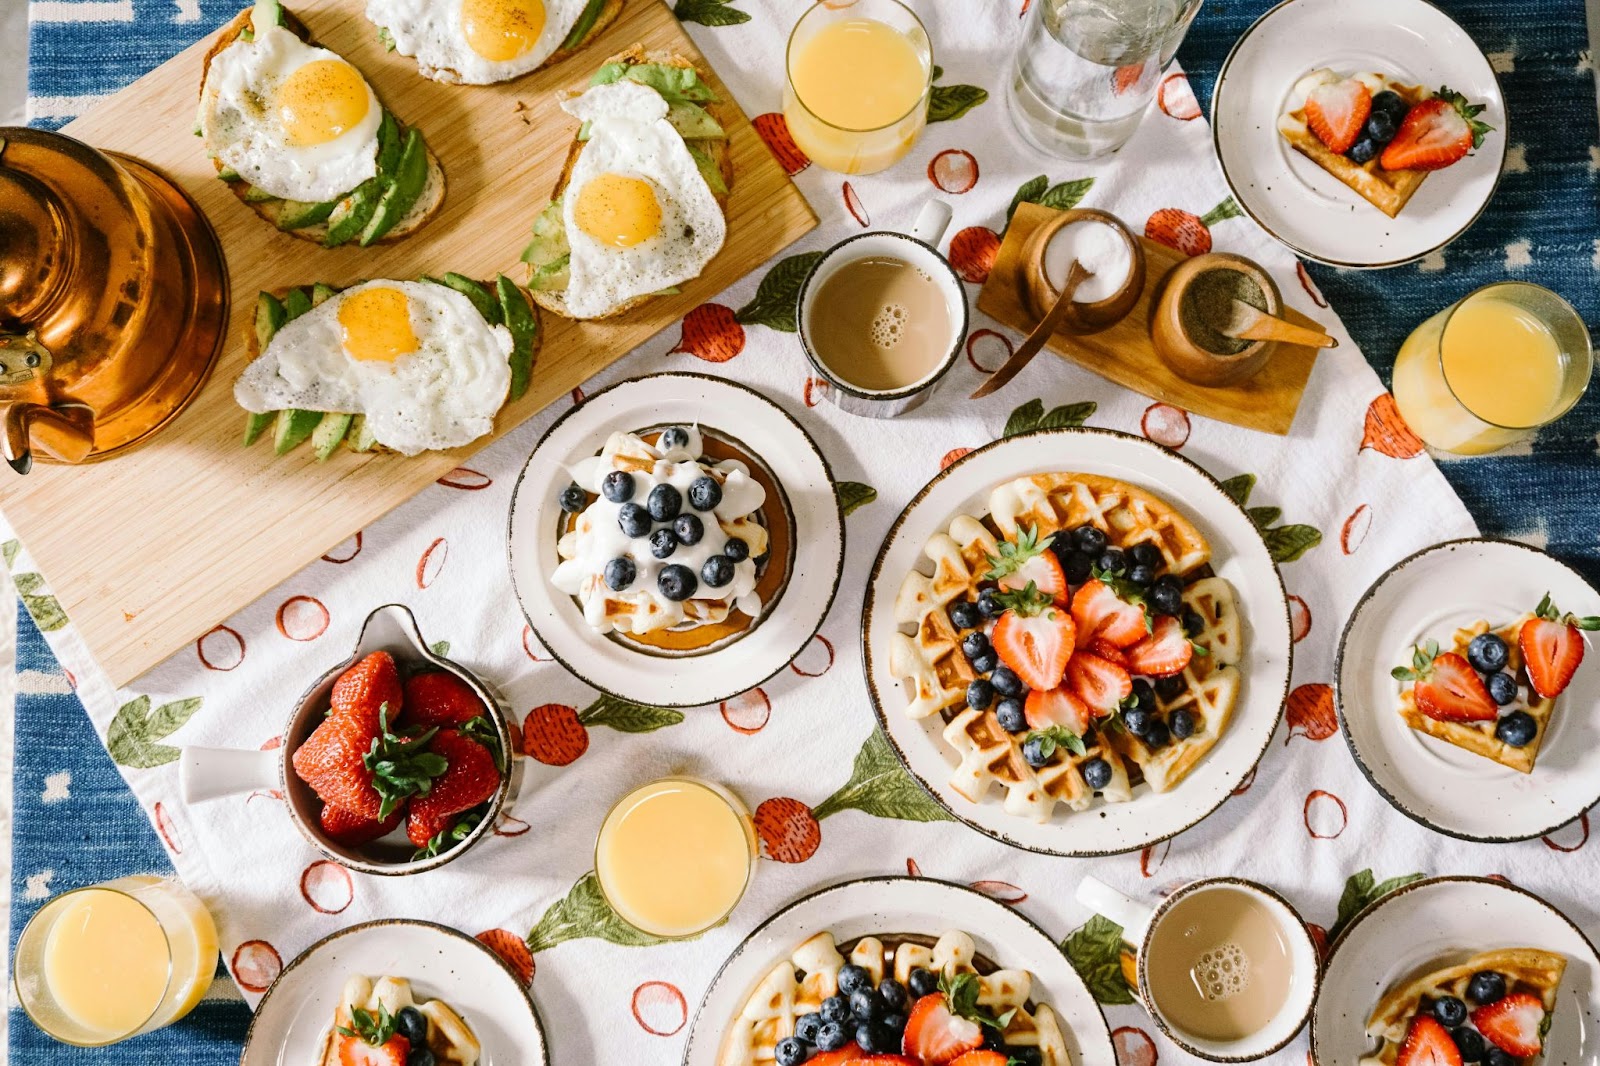 a top-down view of breakfast plates and accompaniments on a printed tablecloth